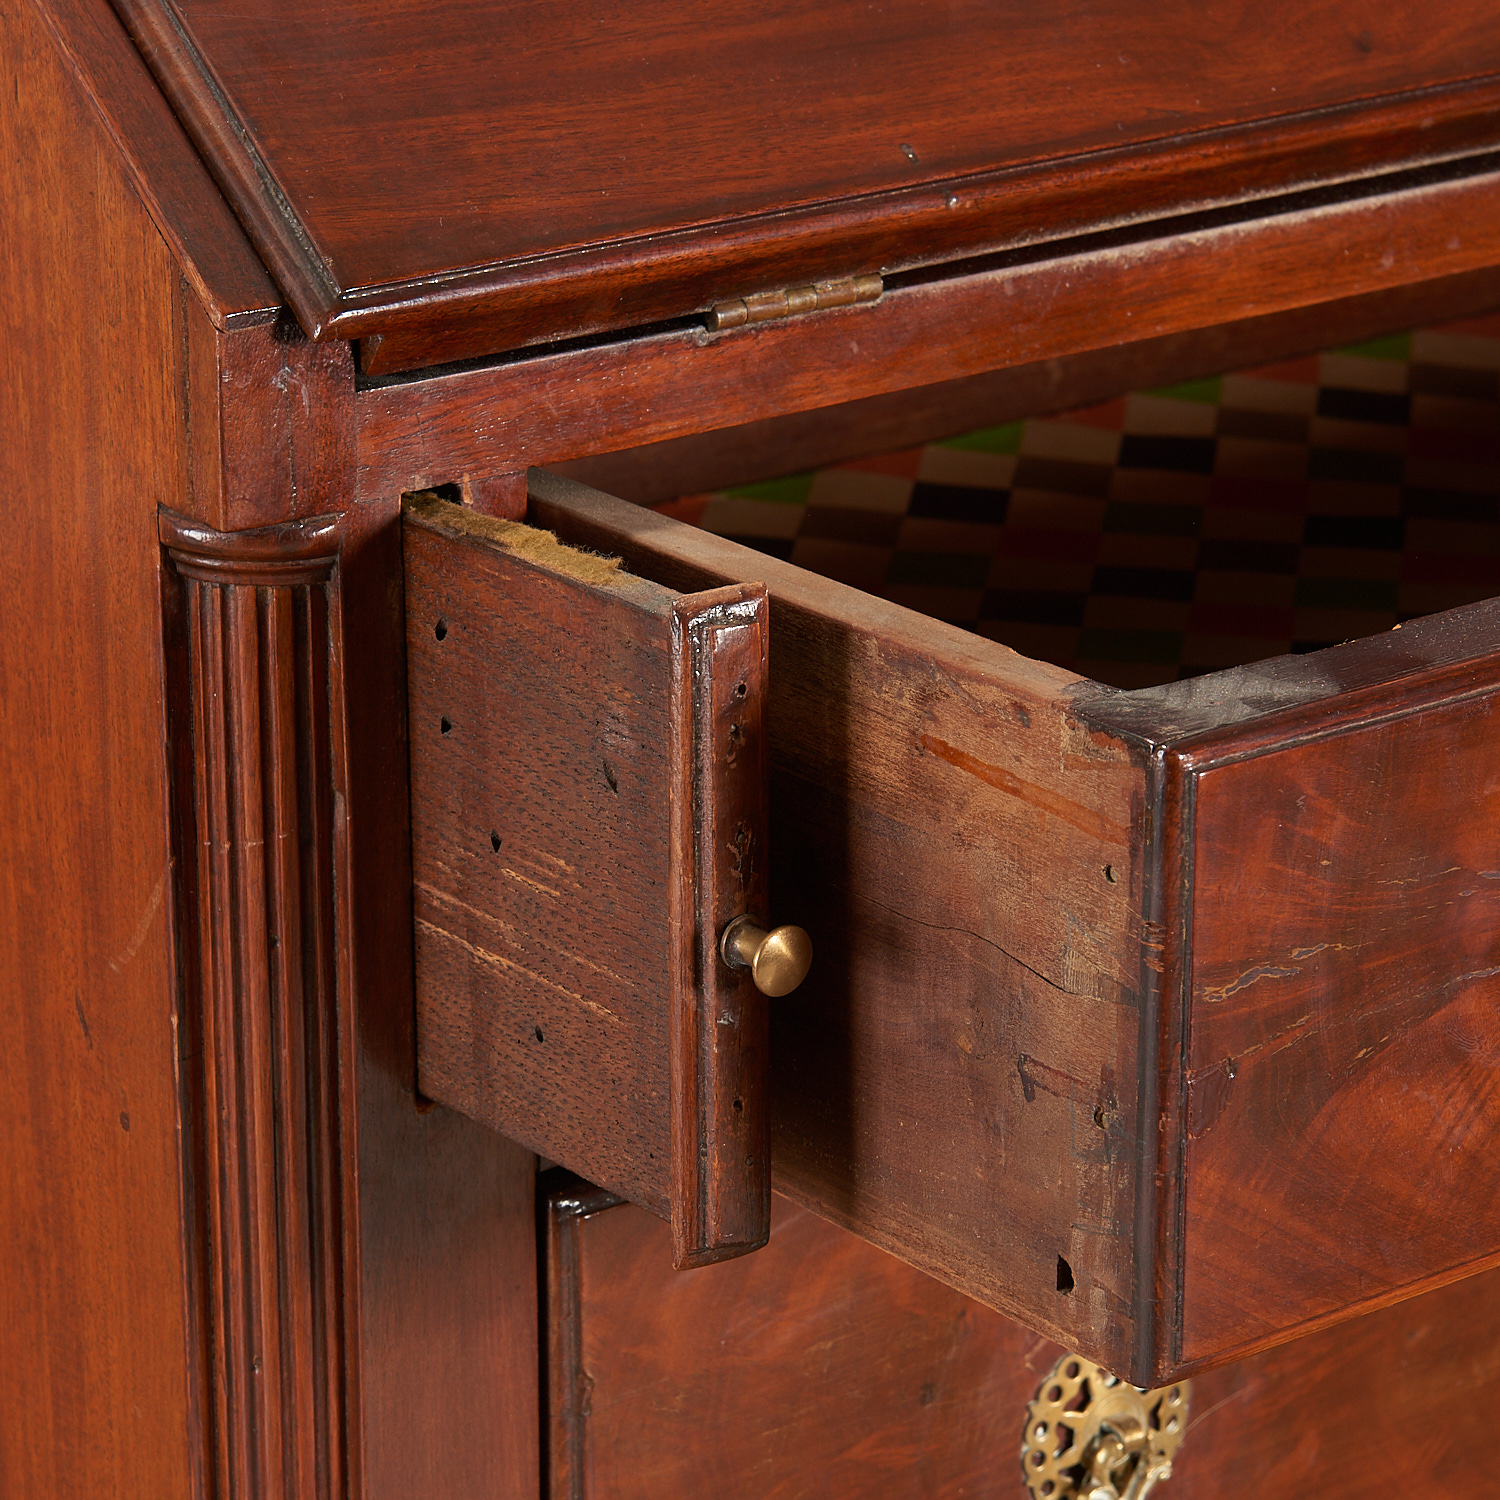 American Chippendale Mahogany Slant-Front Desk - Image 2 of 6